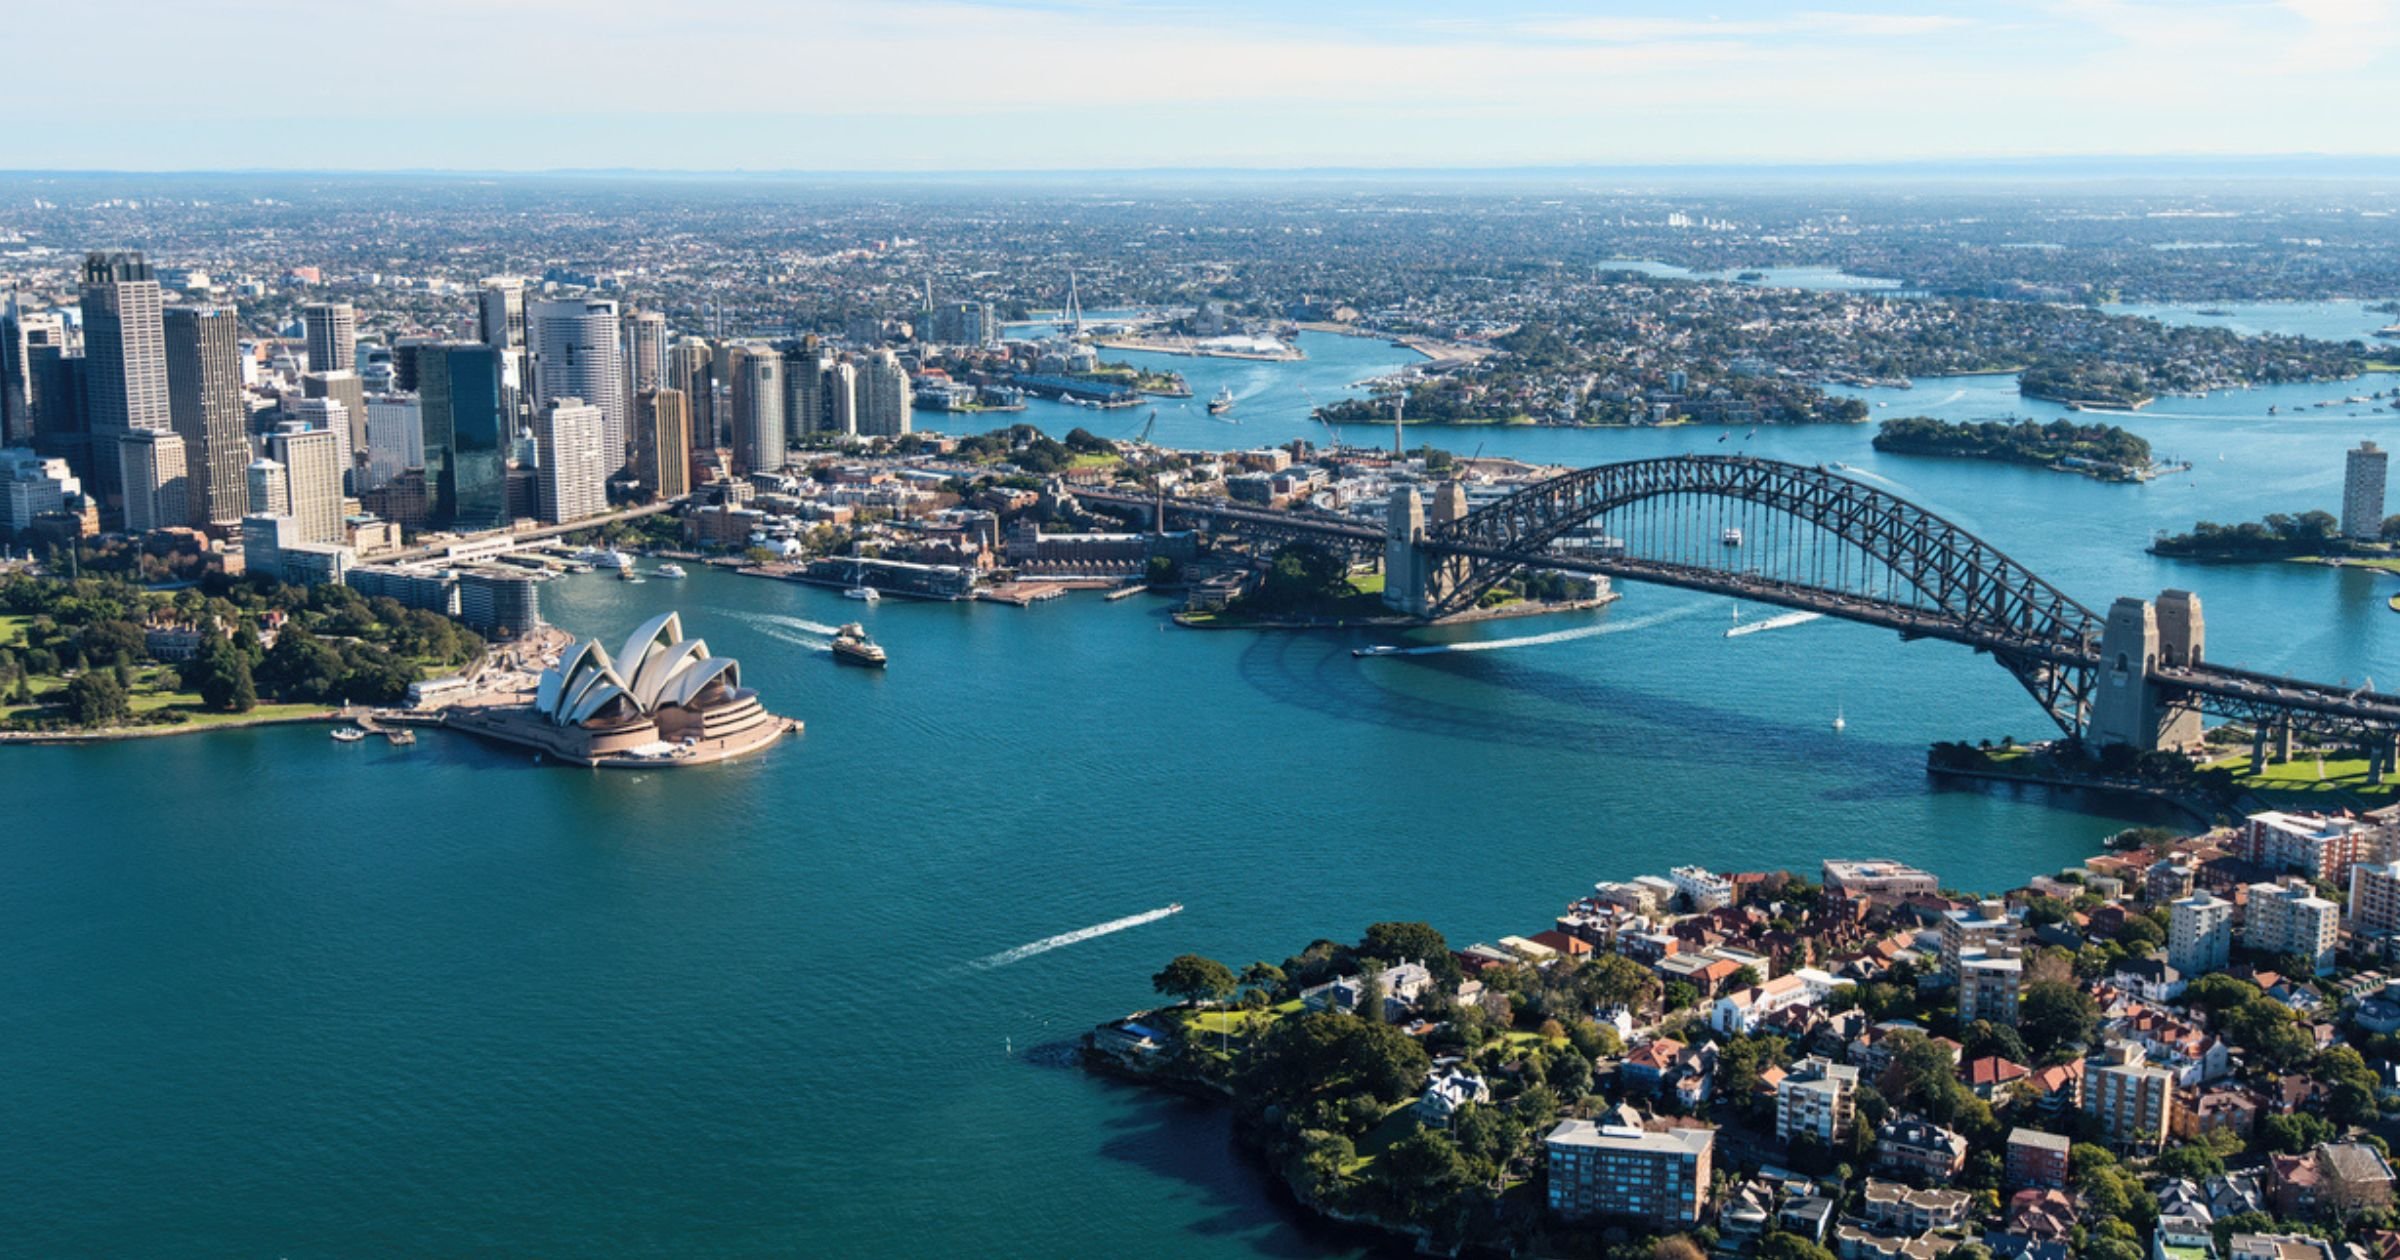 A view of Sydney harbour from above